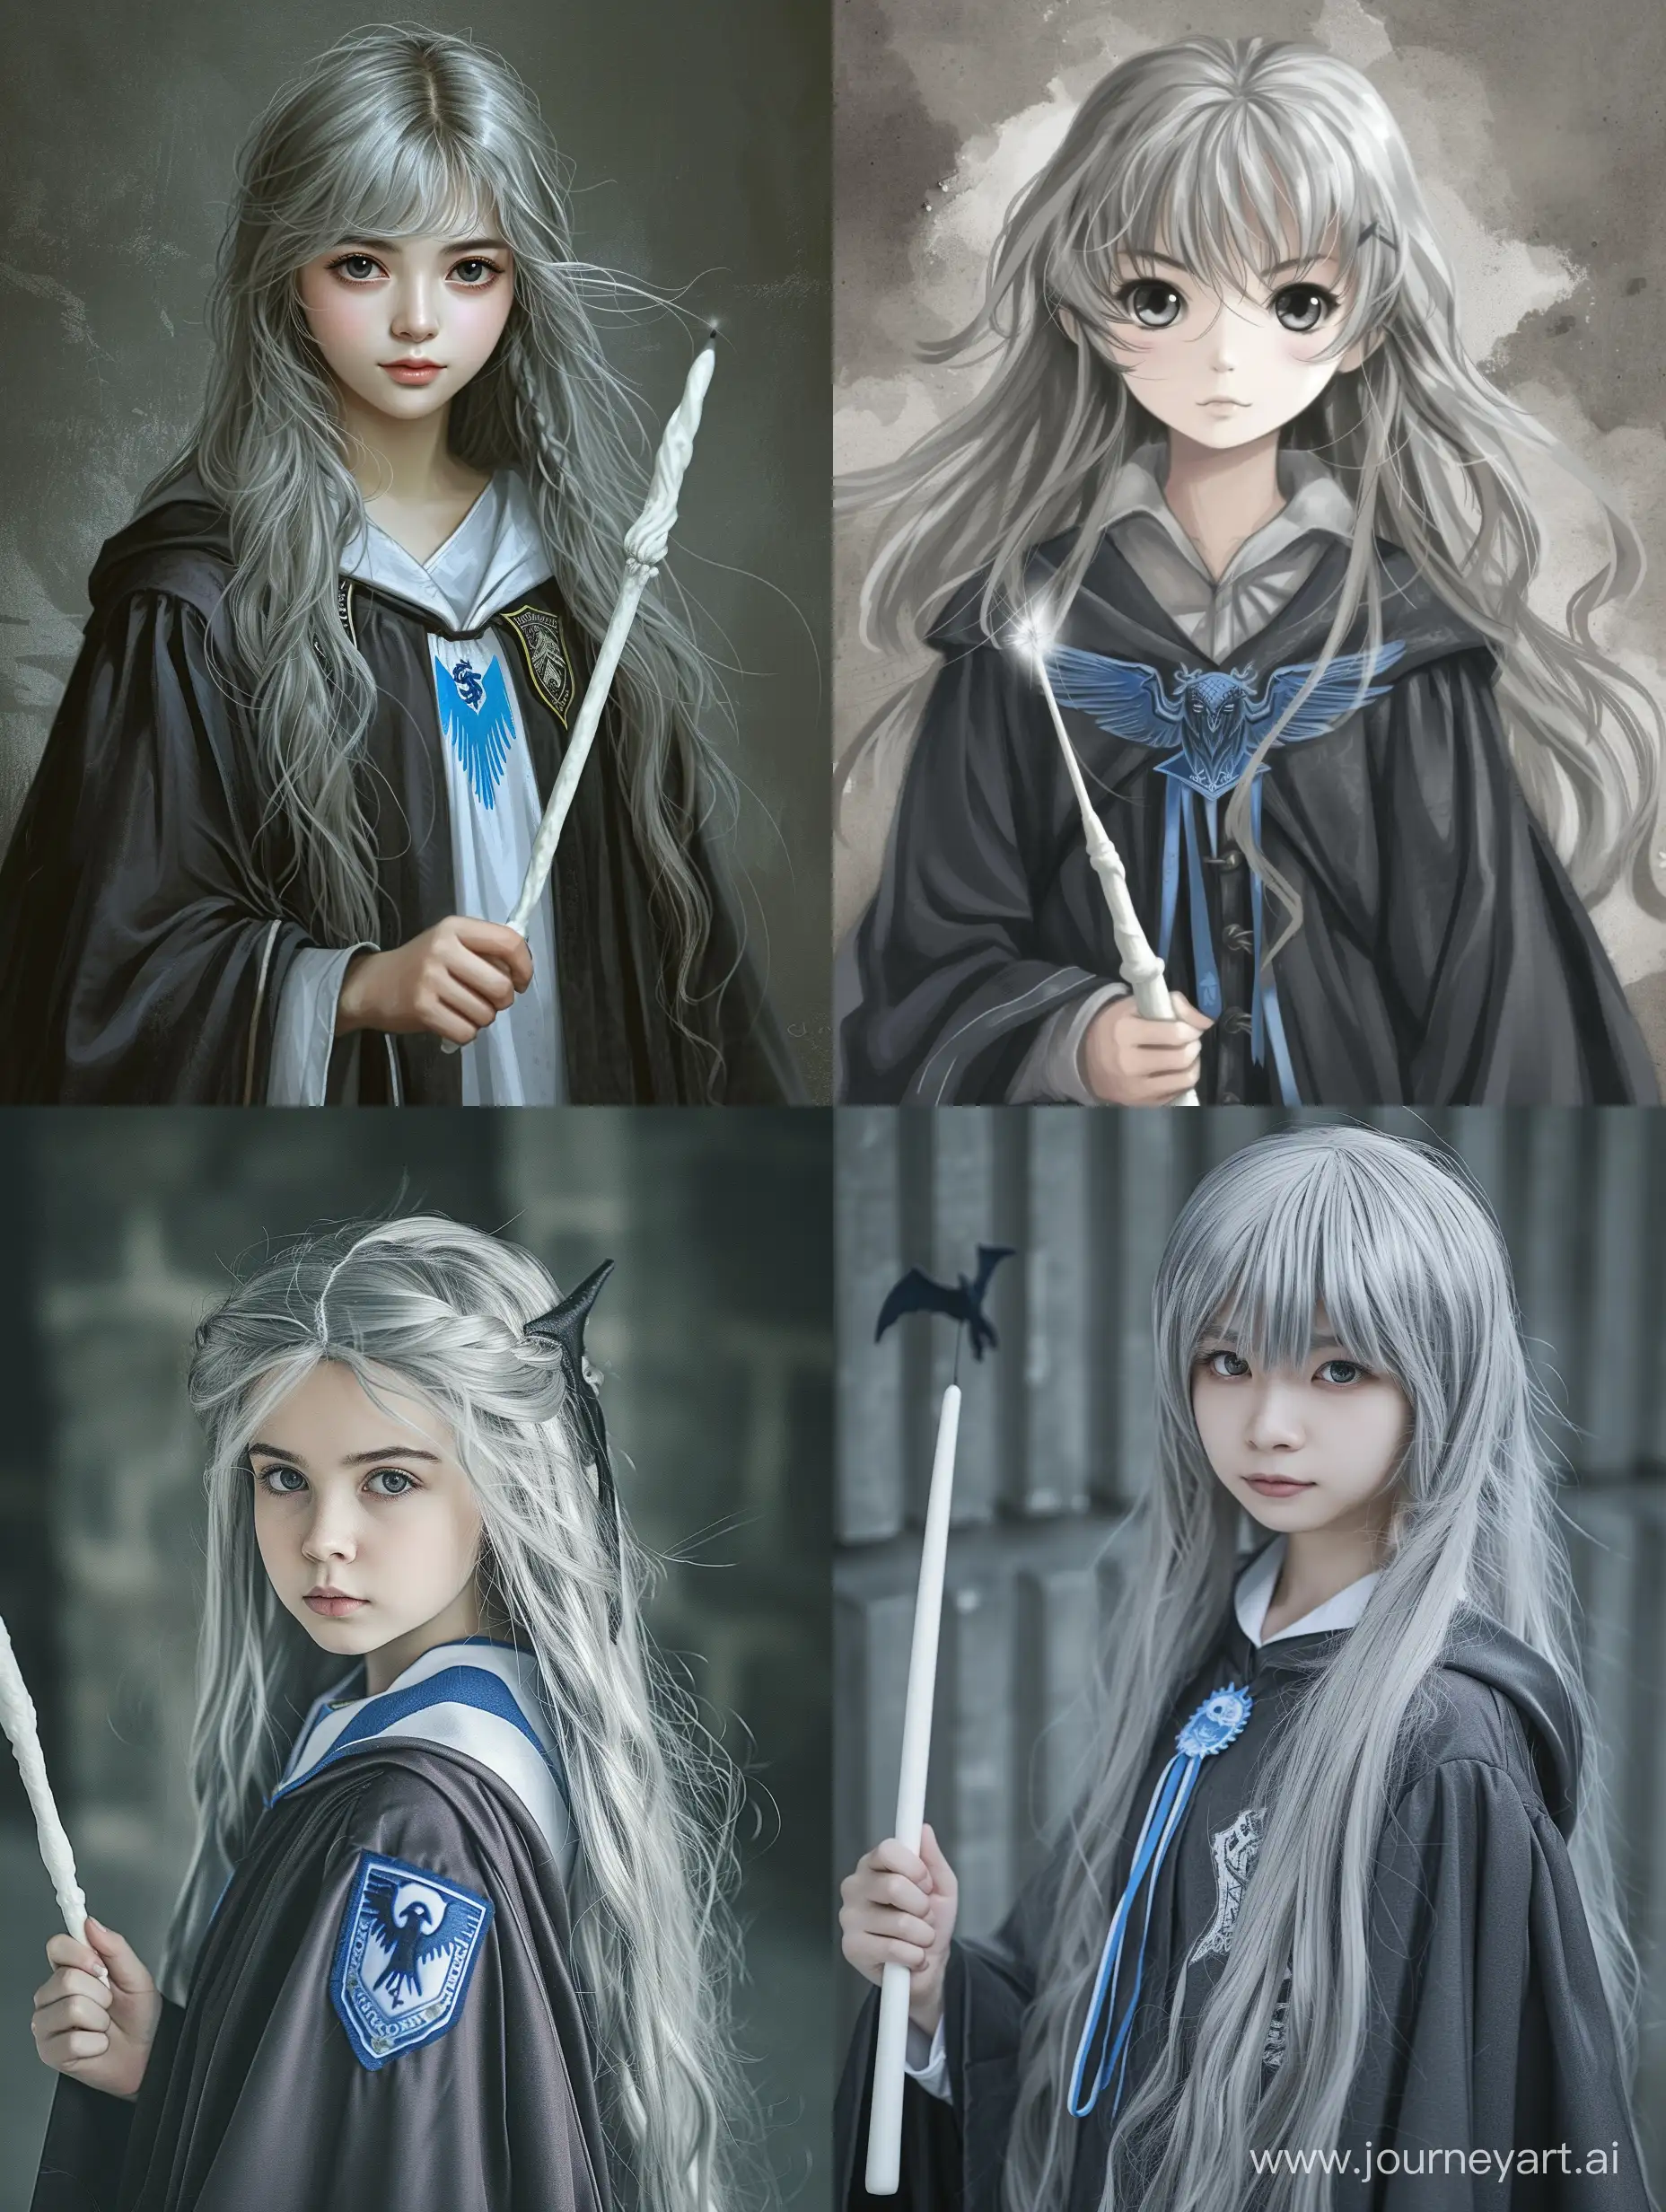 SilverHaired-Sorceress-at-Hogwarts-School-with-Raven-Emblem-Wand